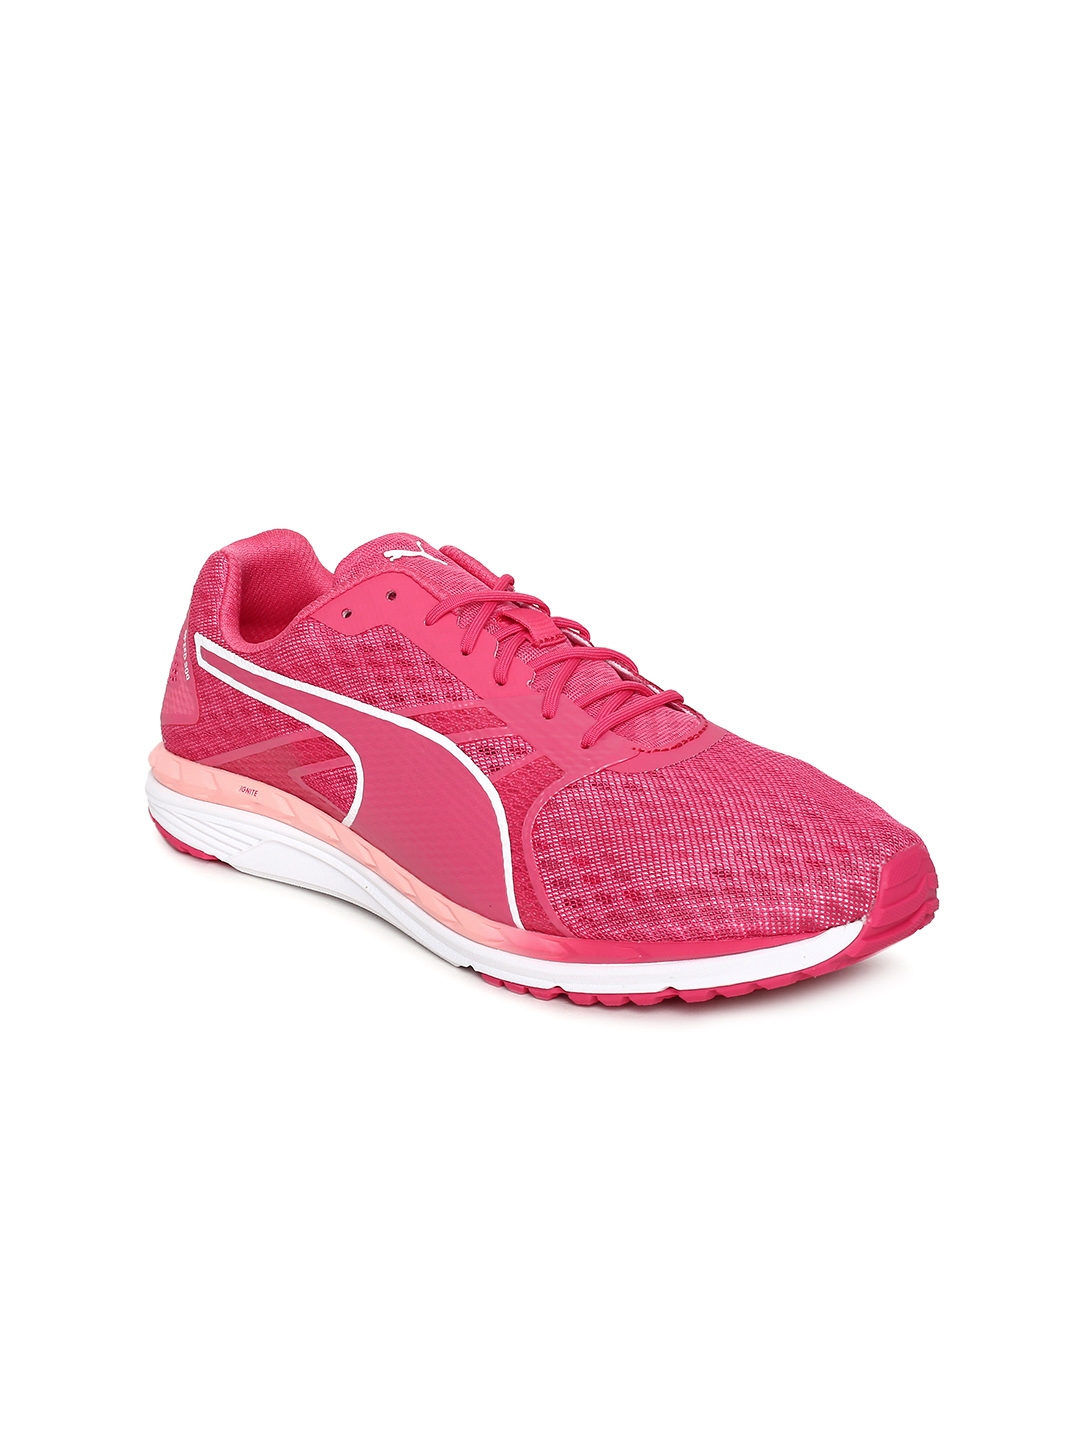 Buy Puma Women Pink Speed 300 IGNITE 3 Running Shoes - Sports Shoes for ...